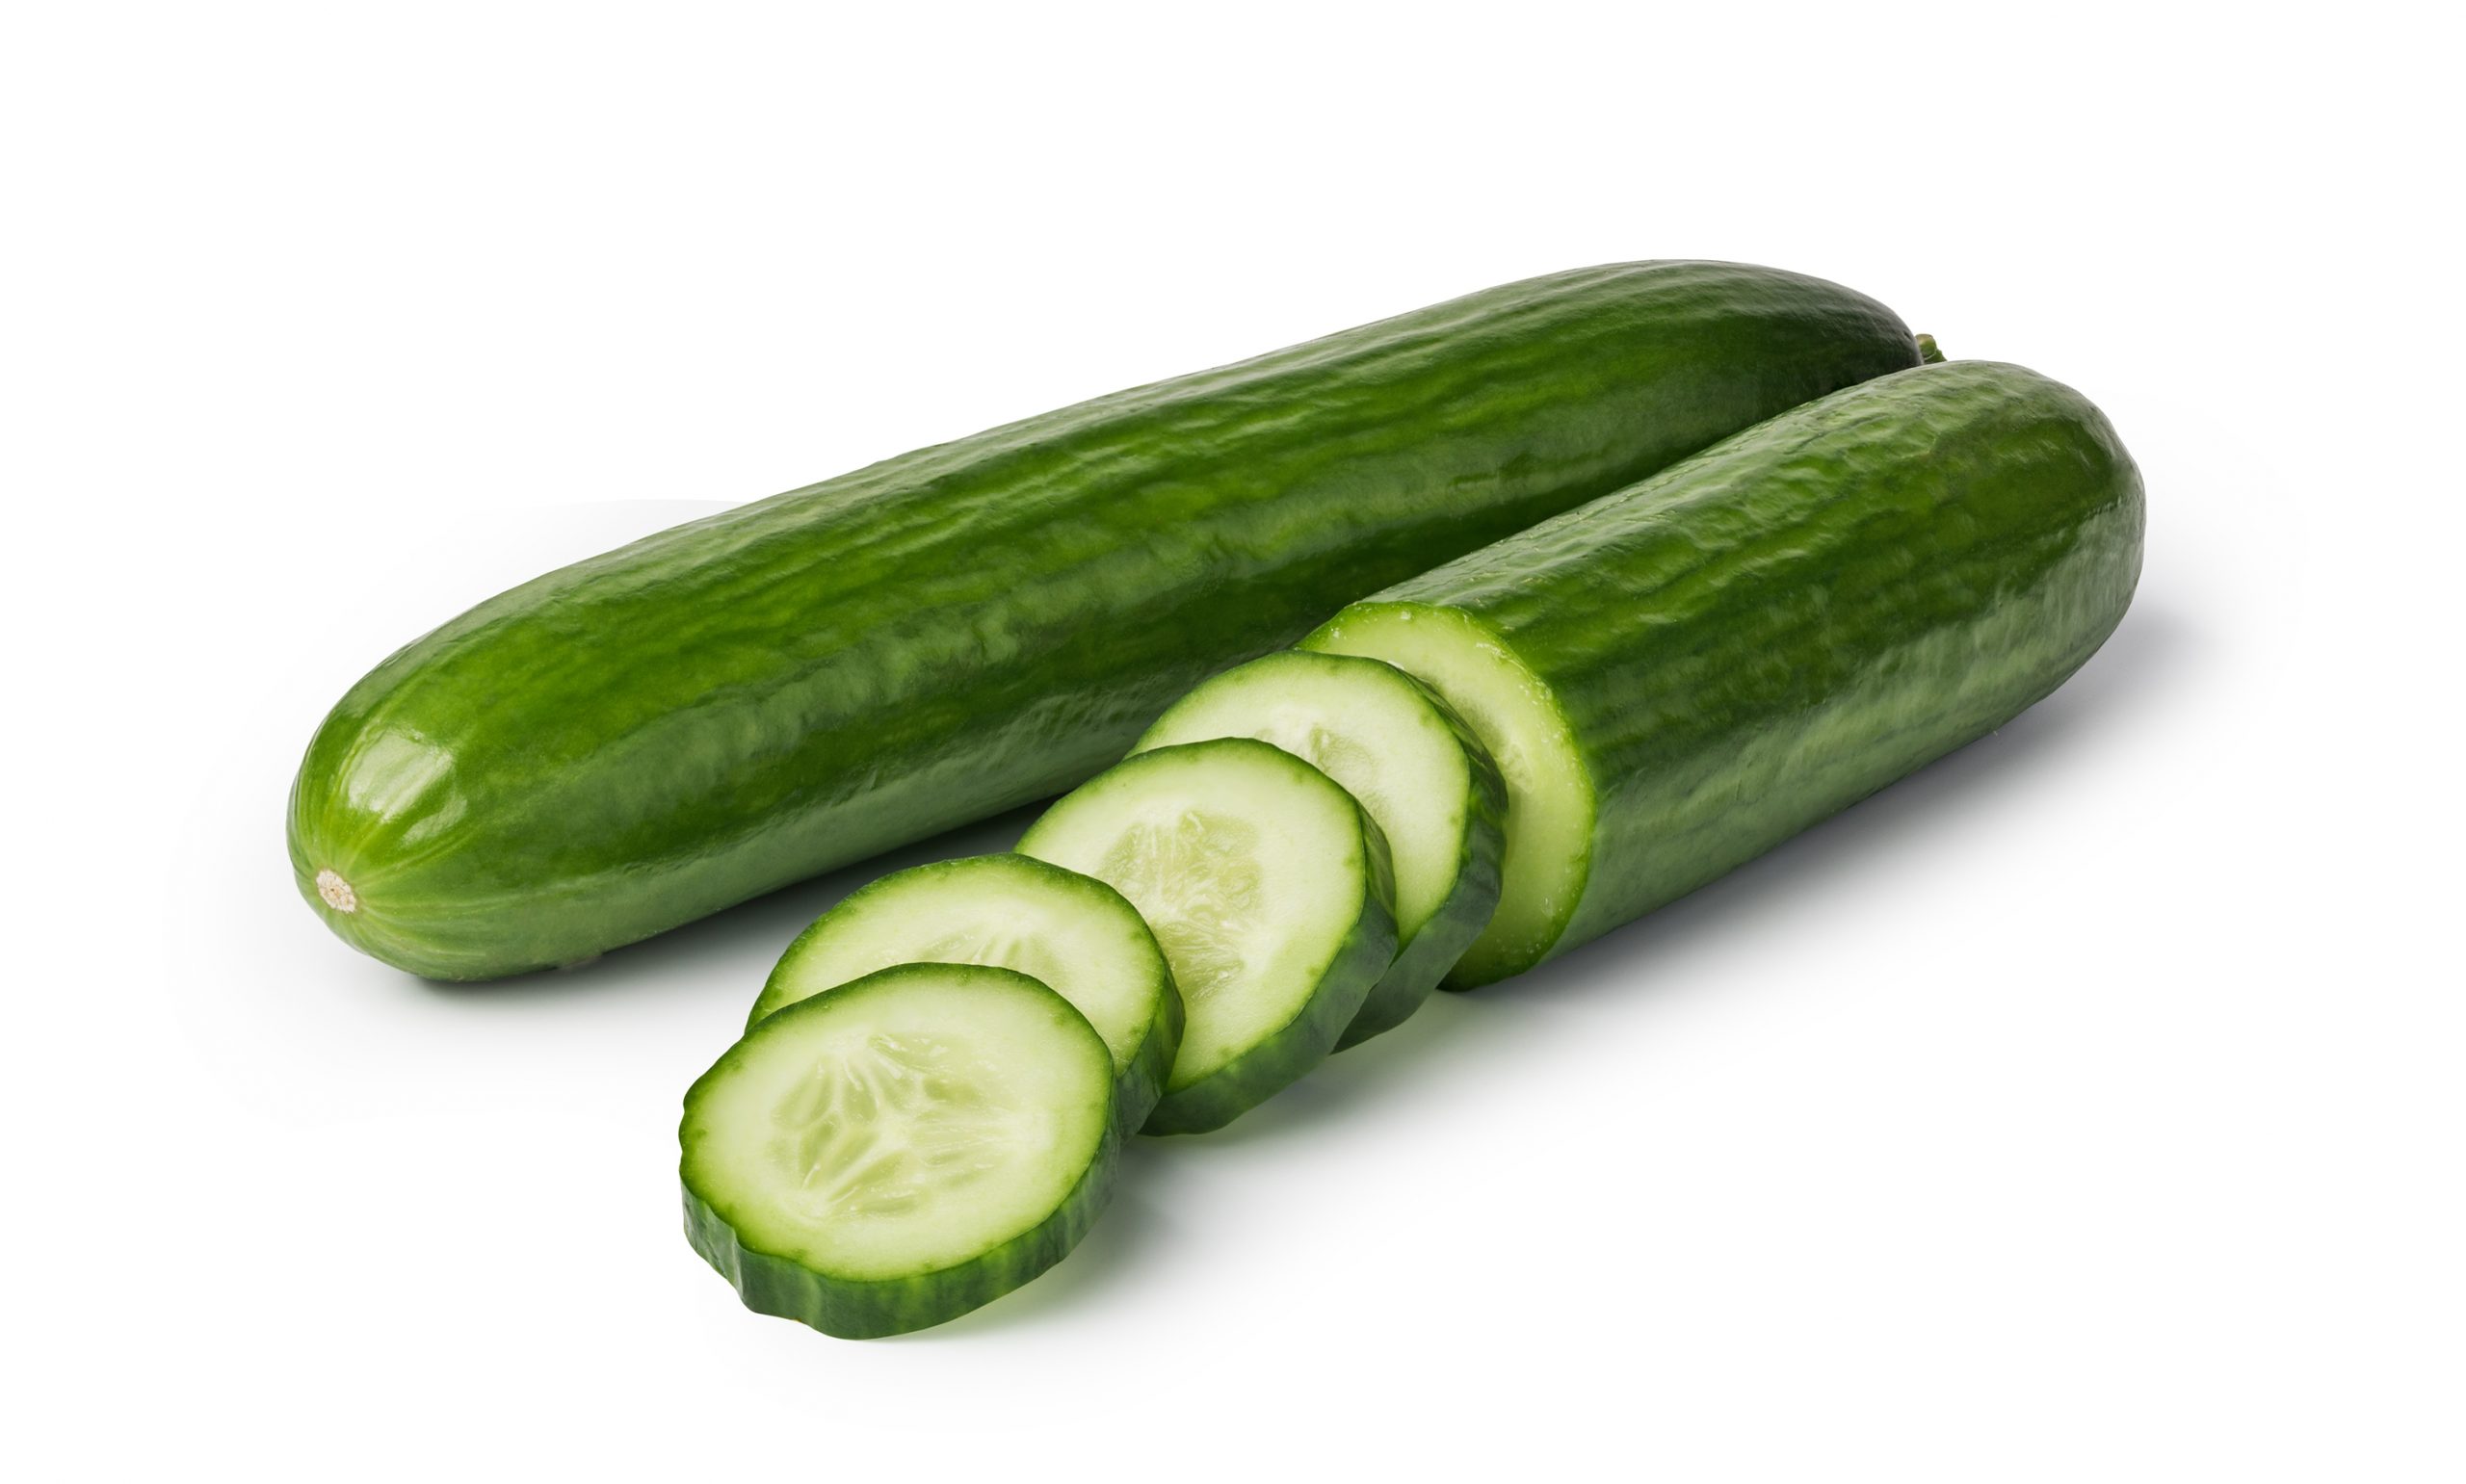 https://www.freshpoint.com/wp-content/uploads/2020/02/freshpoint-english-cucumber-scaled.jpg